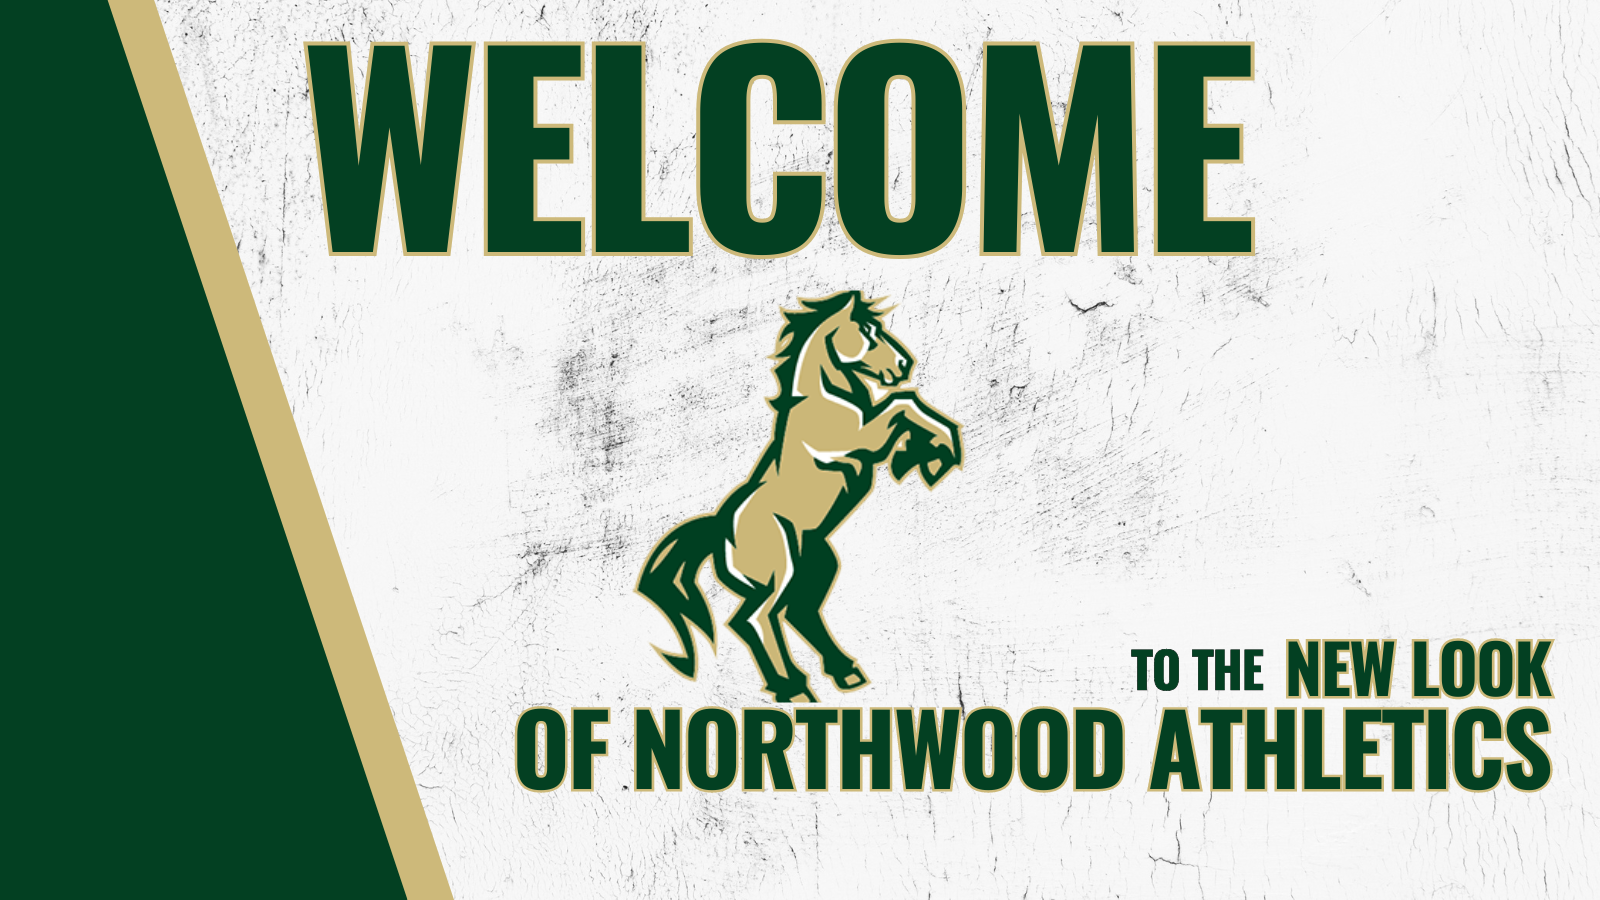 1710859554_NewLayoutAnnouncement8.png - Image for 🎉 Exciting News for Northwood Athletics Fans! 🎉